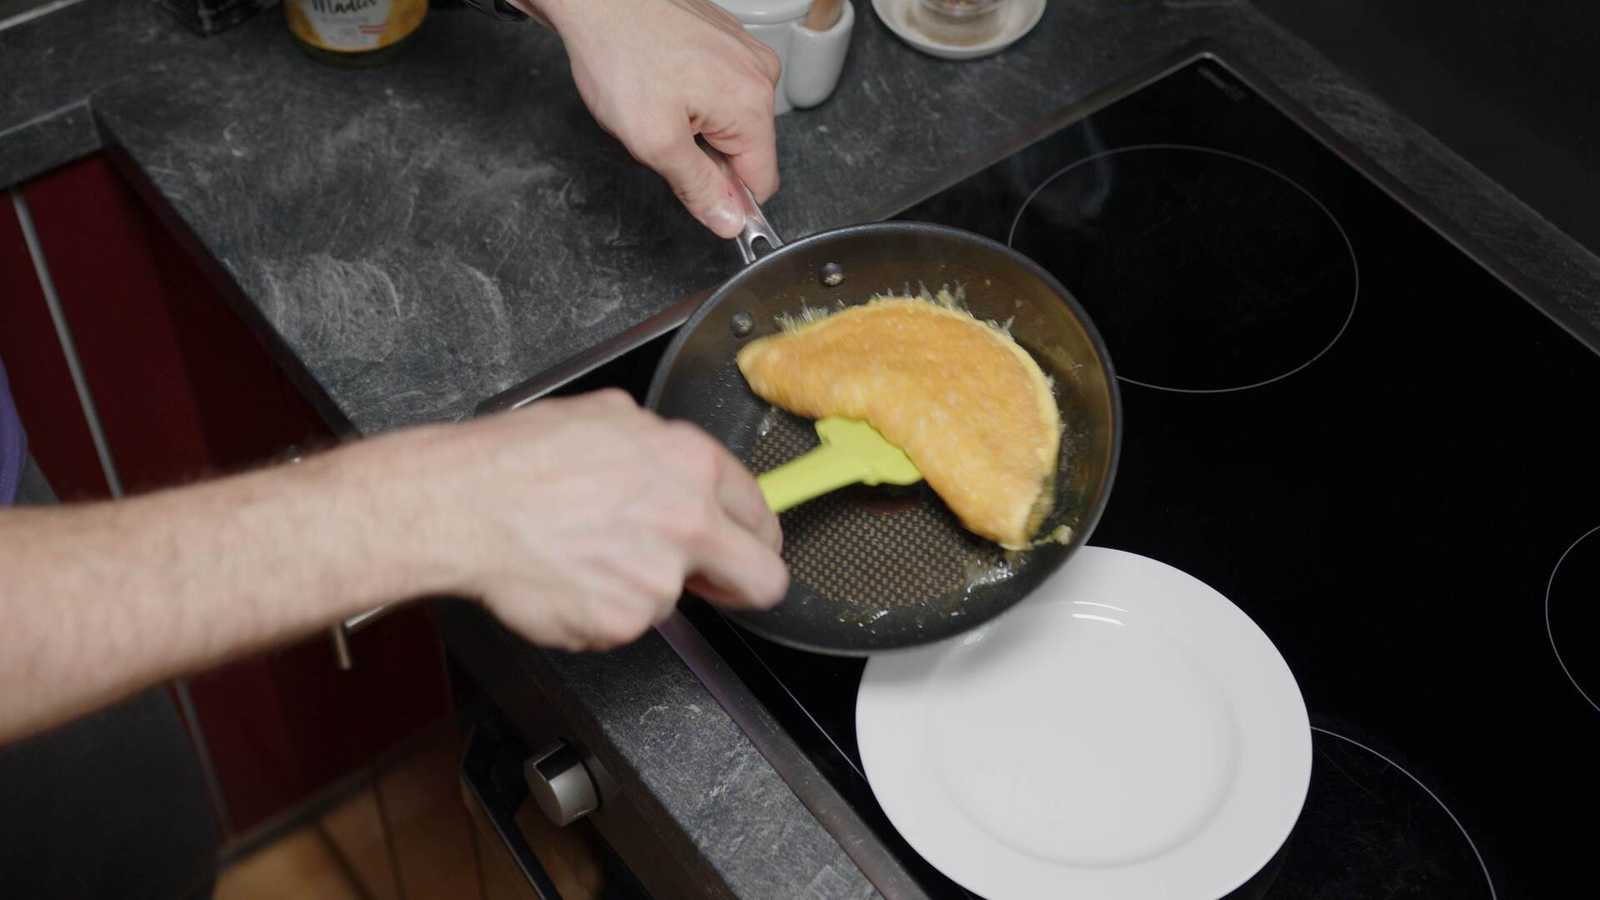 Flipped omelette being taken out of the pan with a spatula